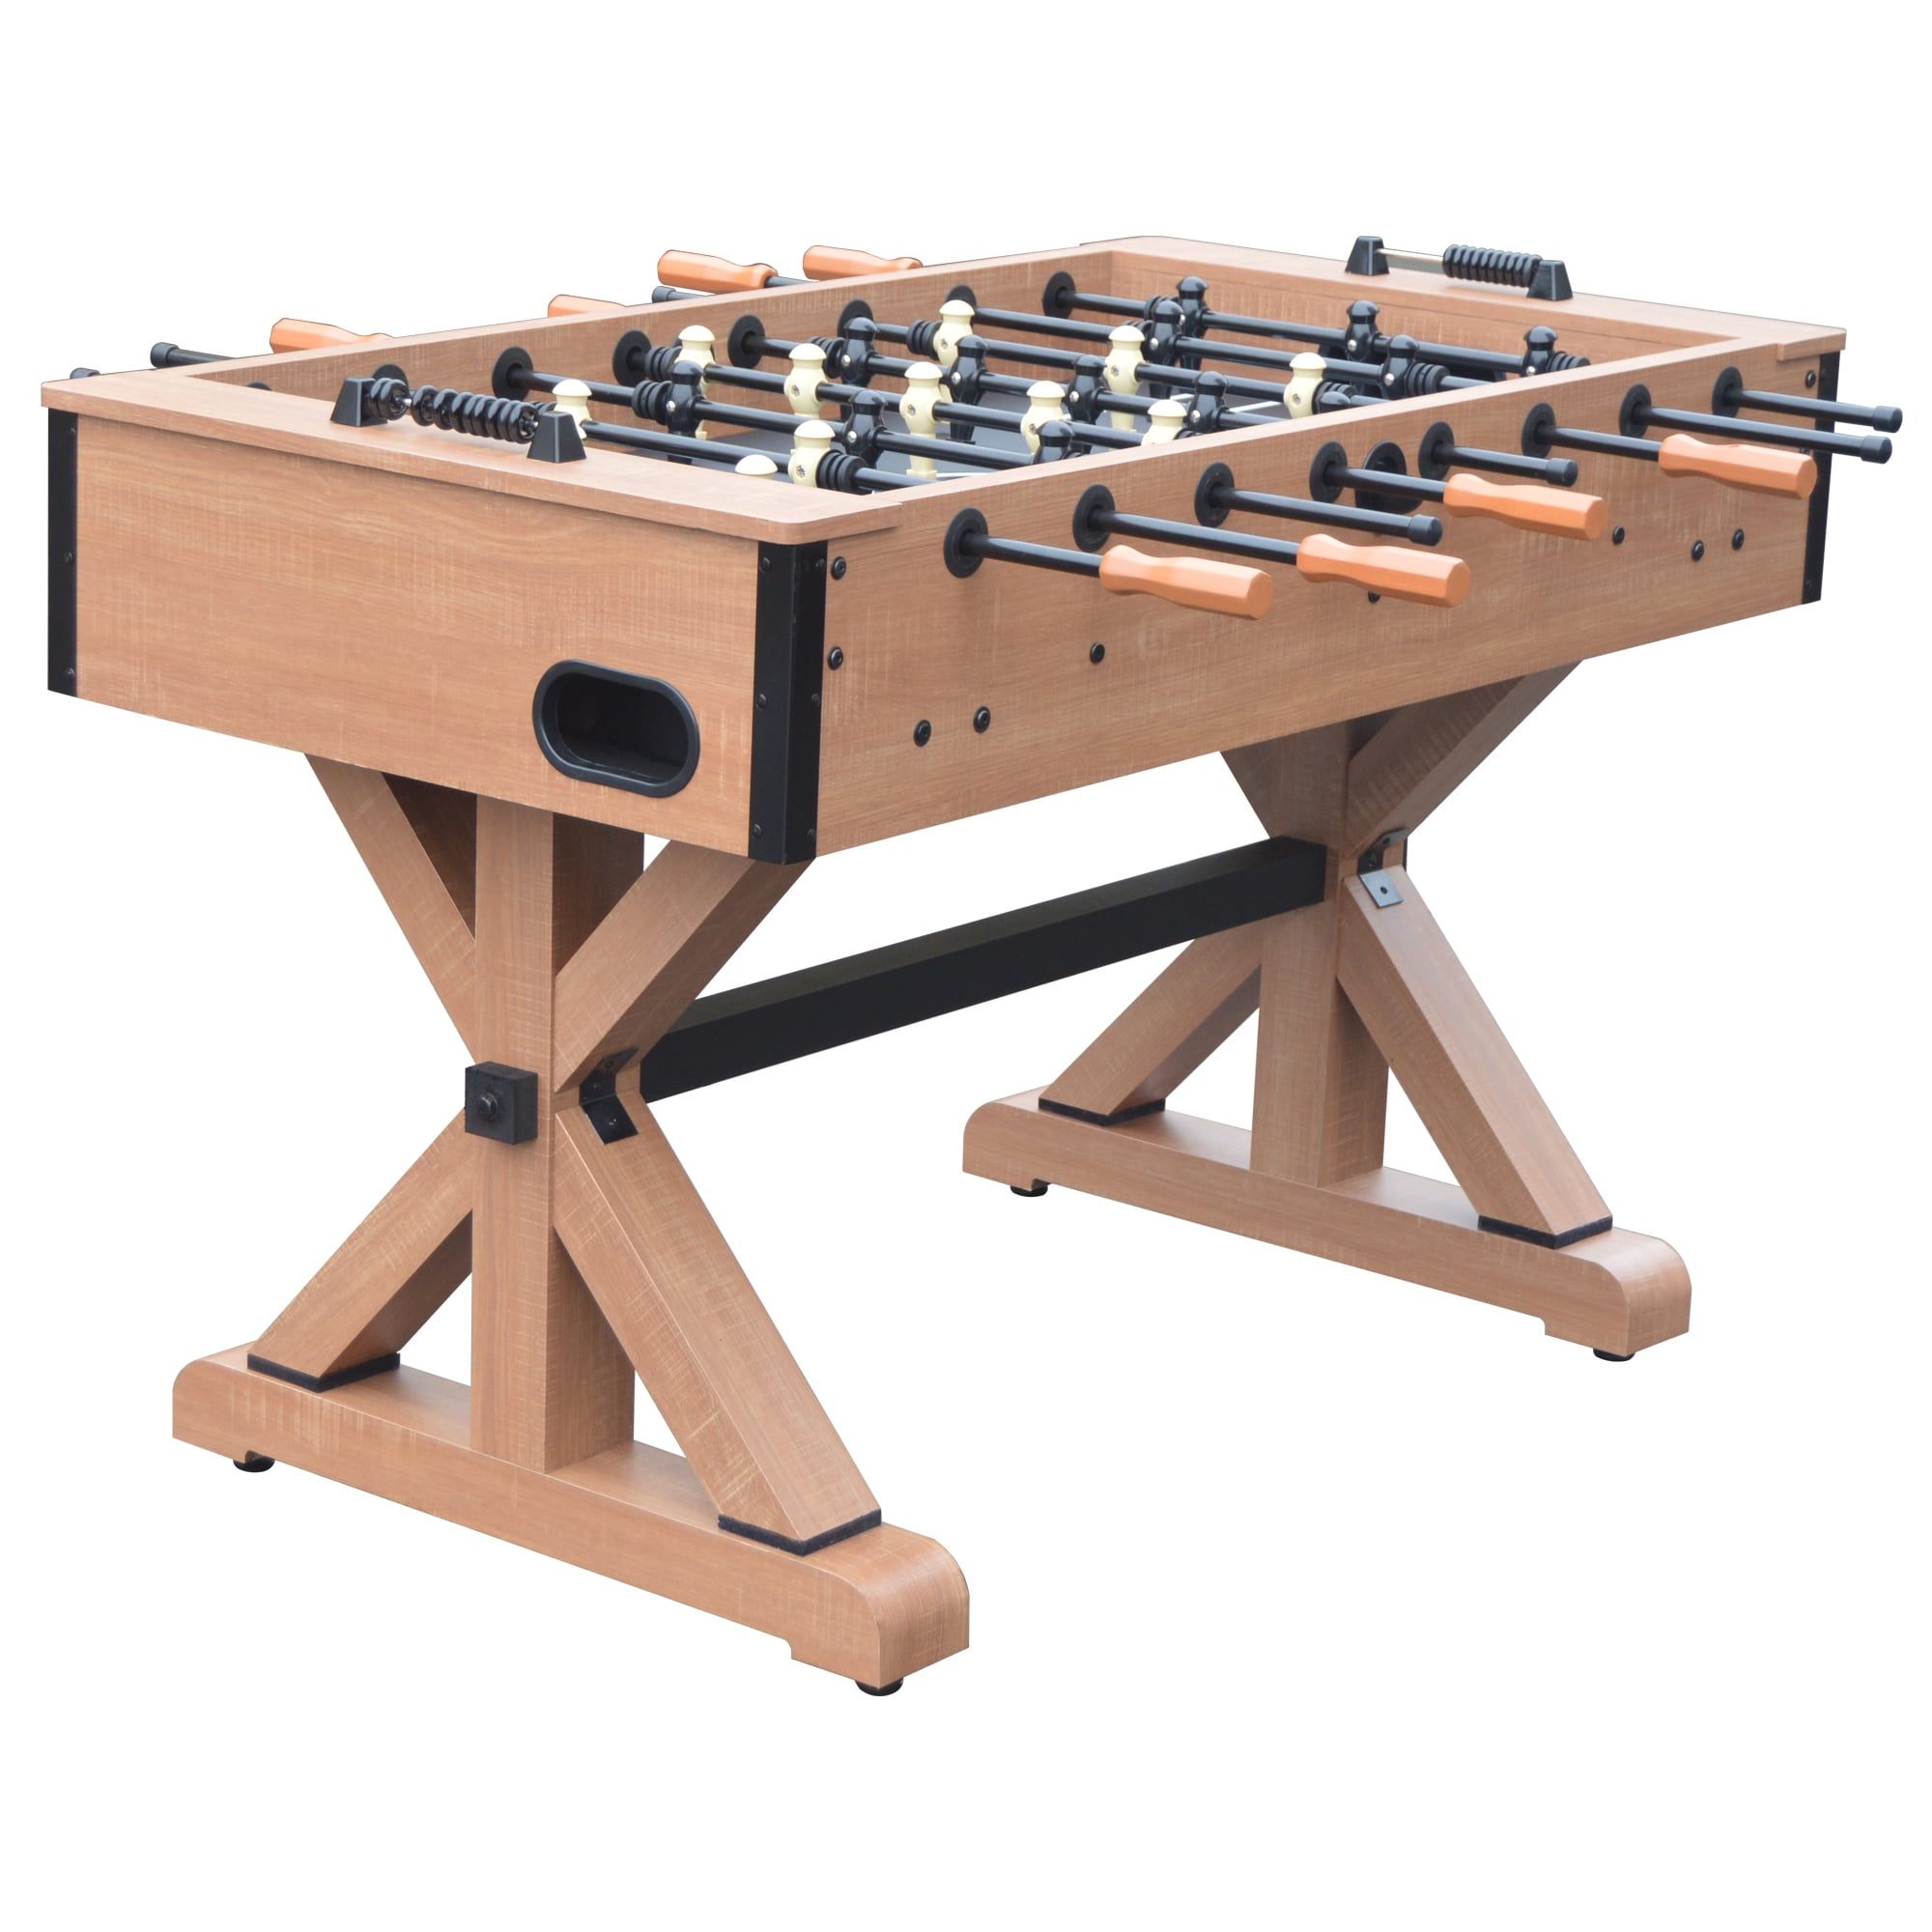 Details about   48" Competition Sized Wooden Soccer Foosball Table Adults Kids Recreation Black 